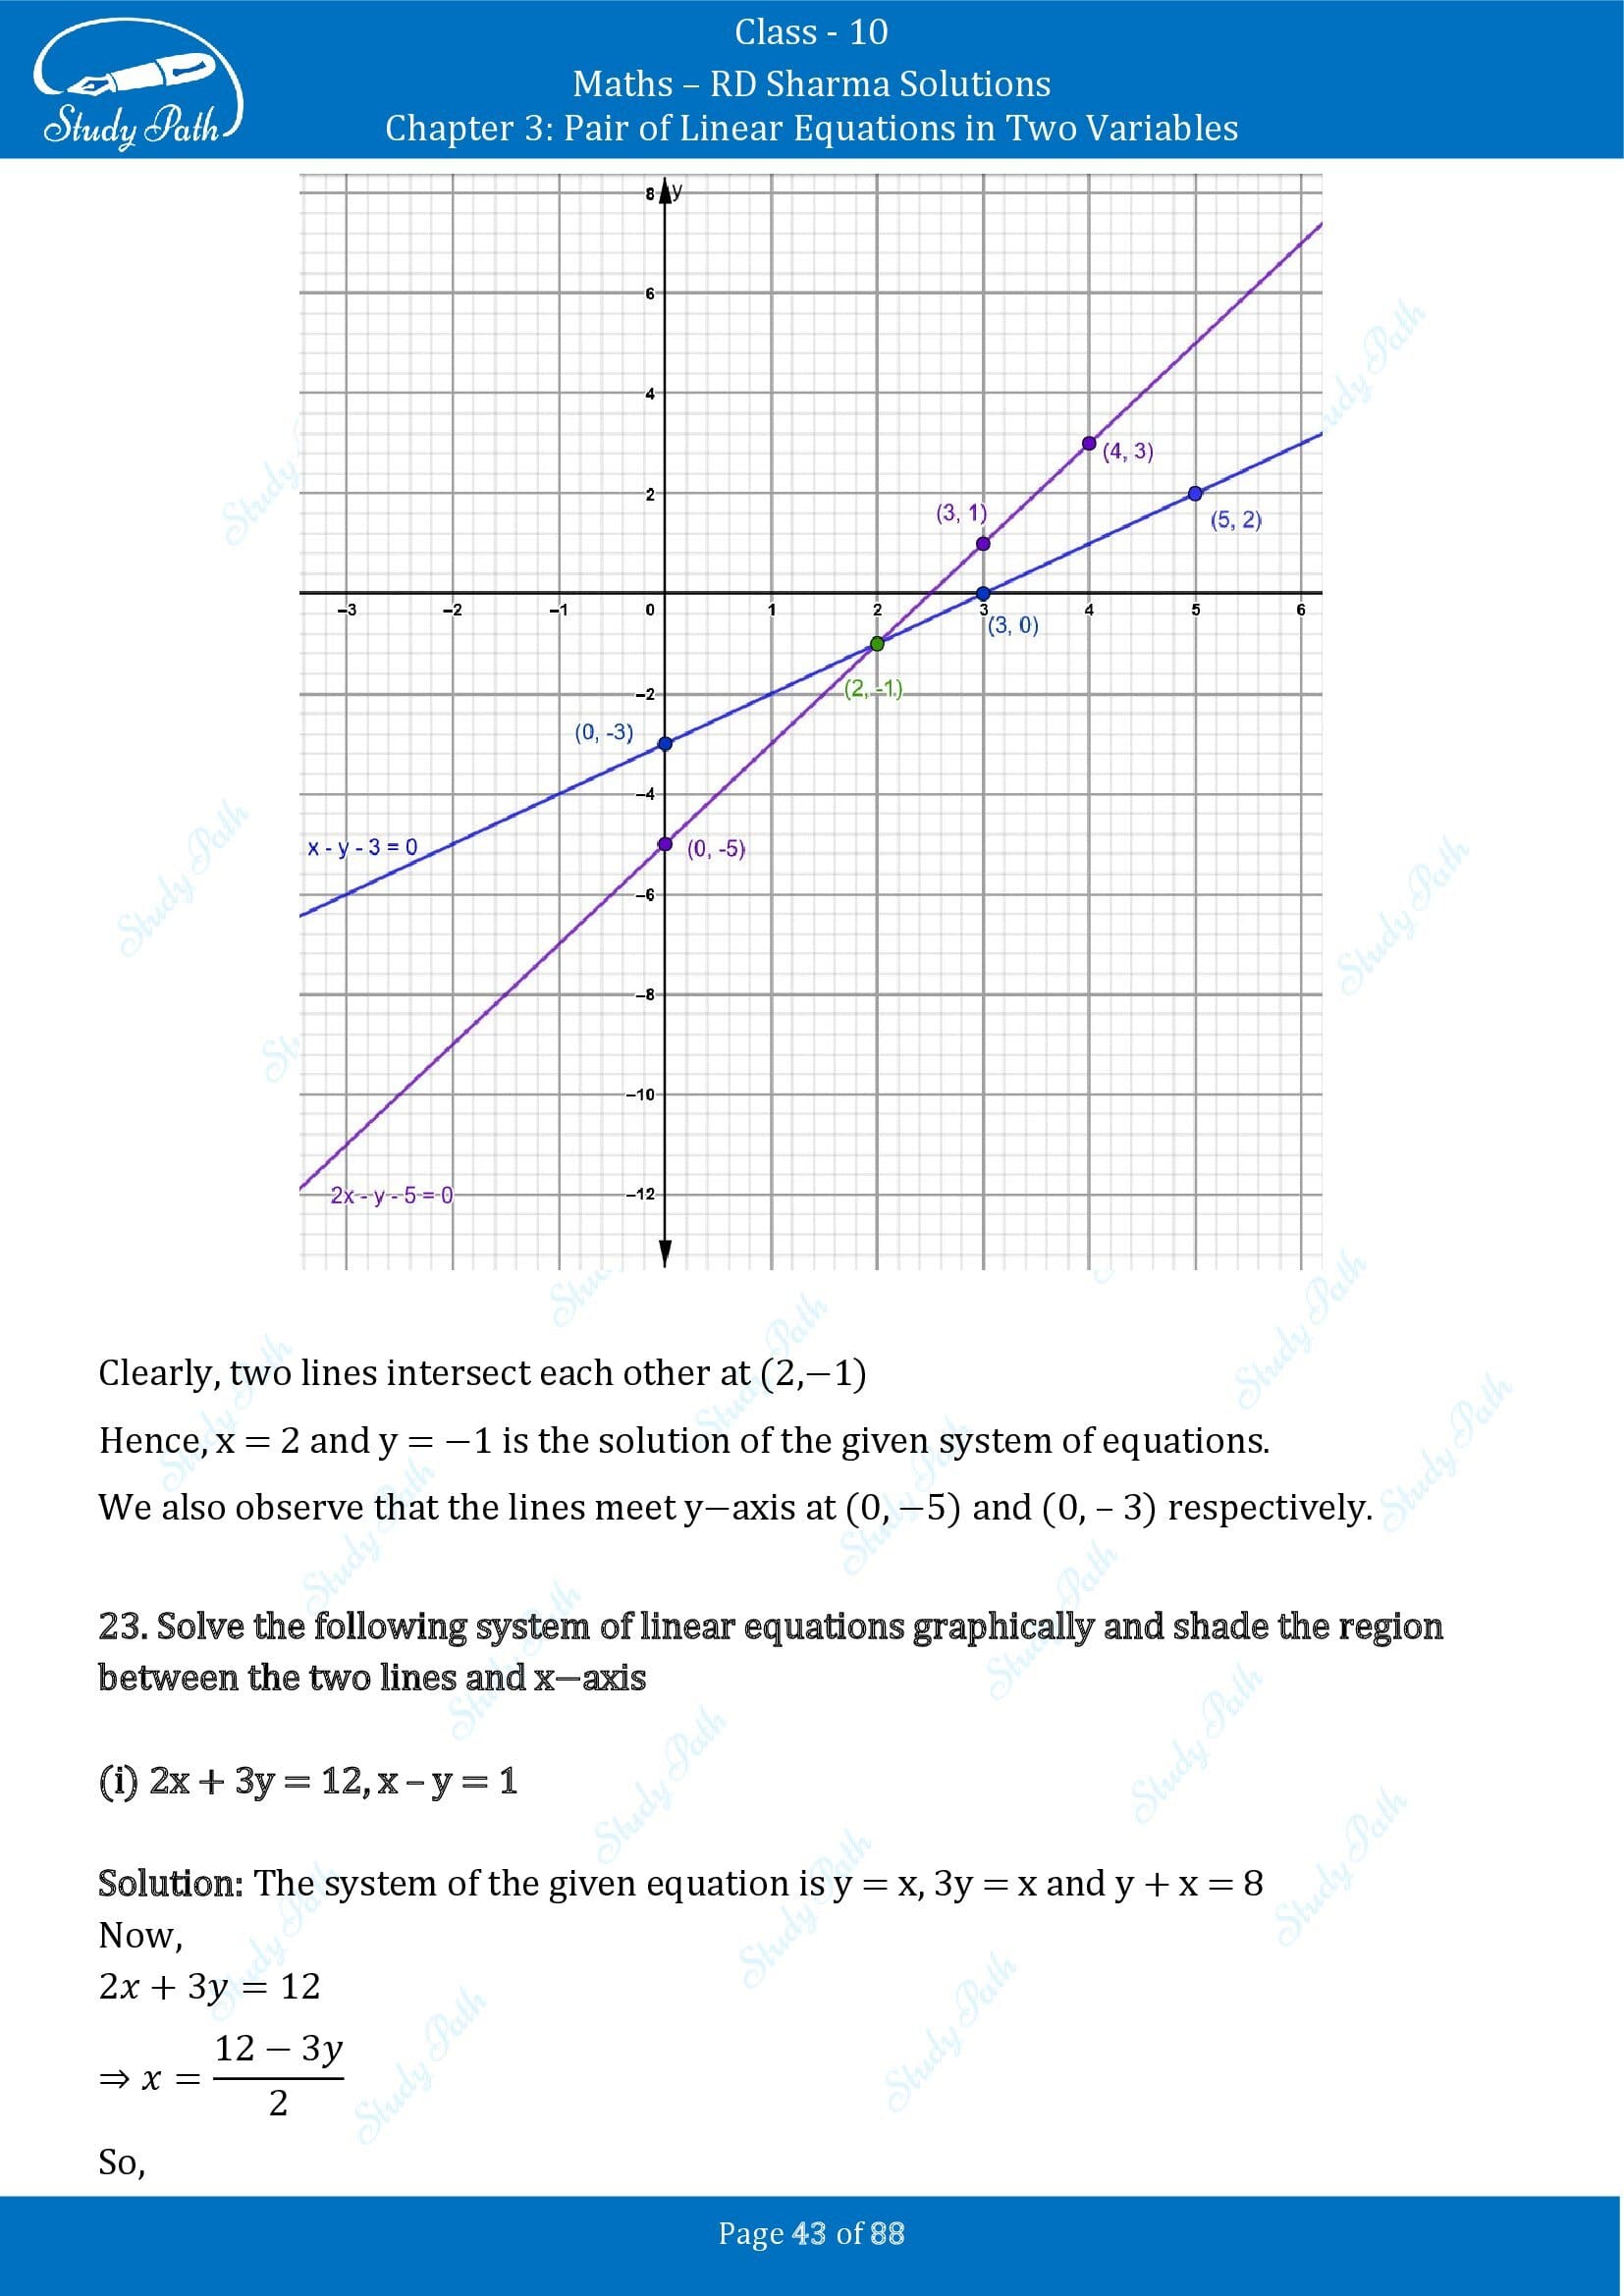 RD Sharma Solutions Class 10 Chapter 3 Pair of Linear Equations in Two Variables Exercise 3.2 00043